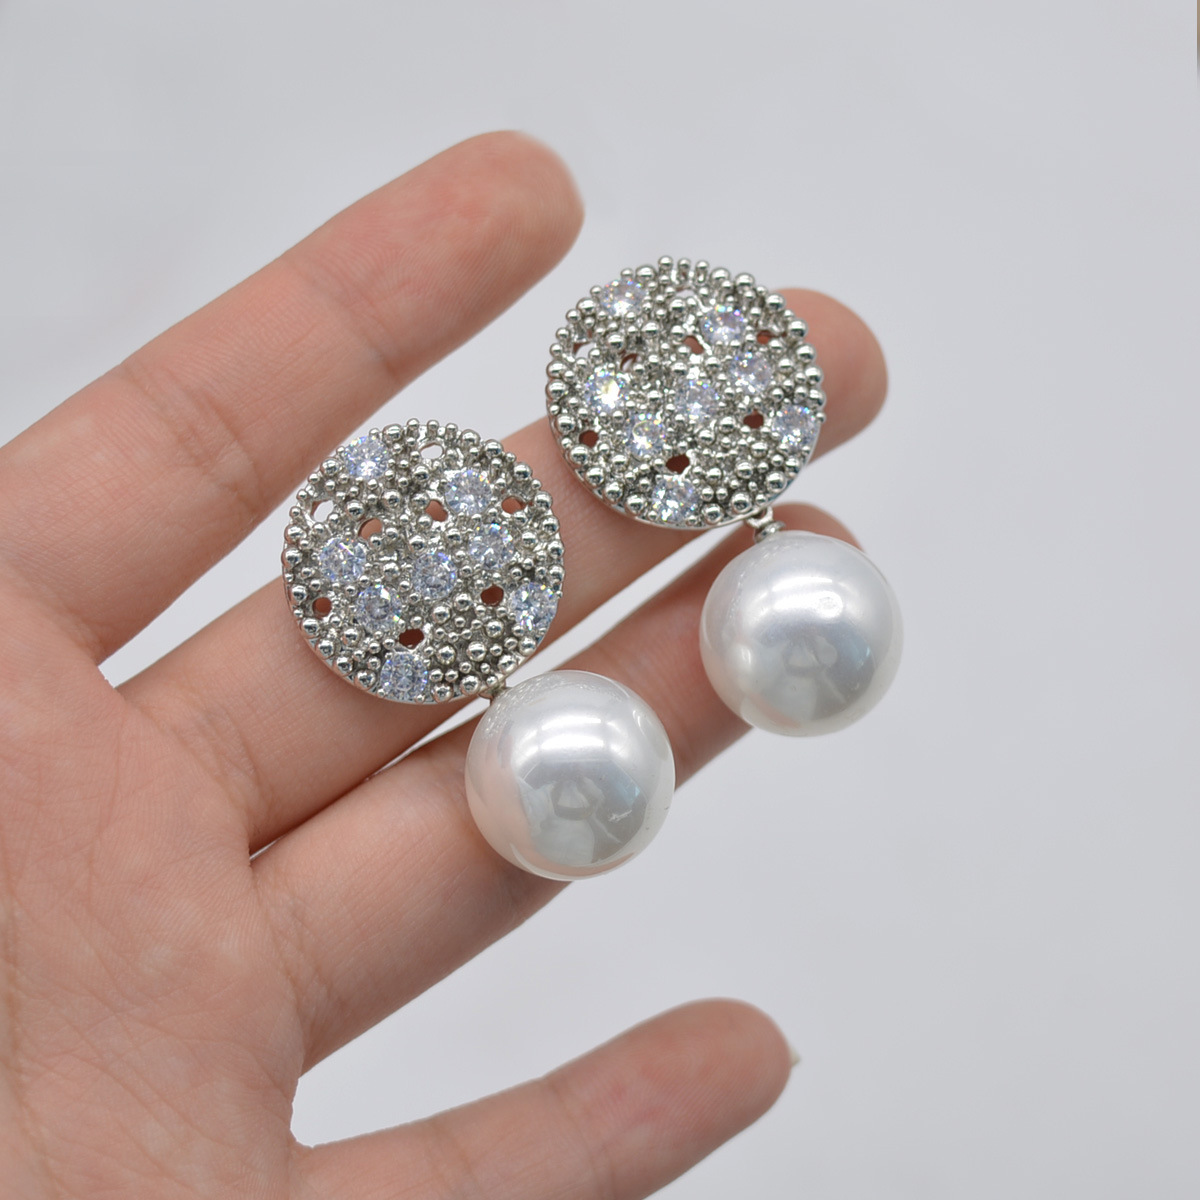 fashion diamondstudded pearl earrings simple alloy drop earringspicture3